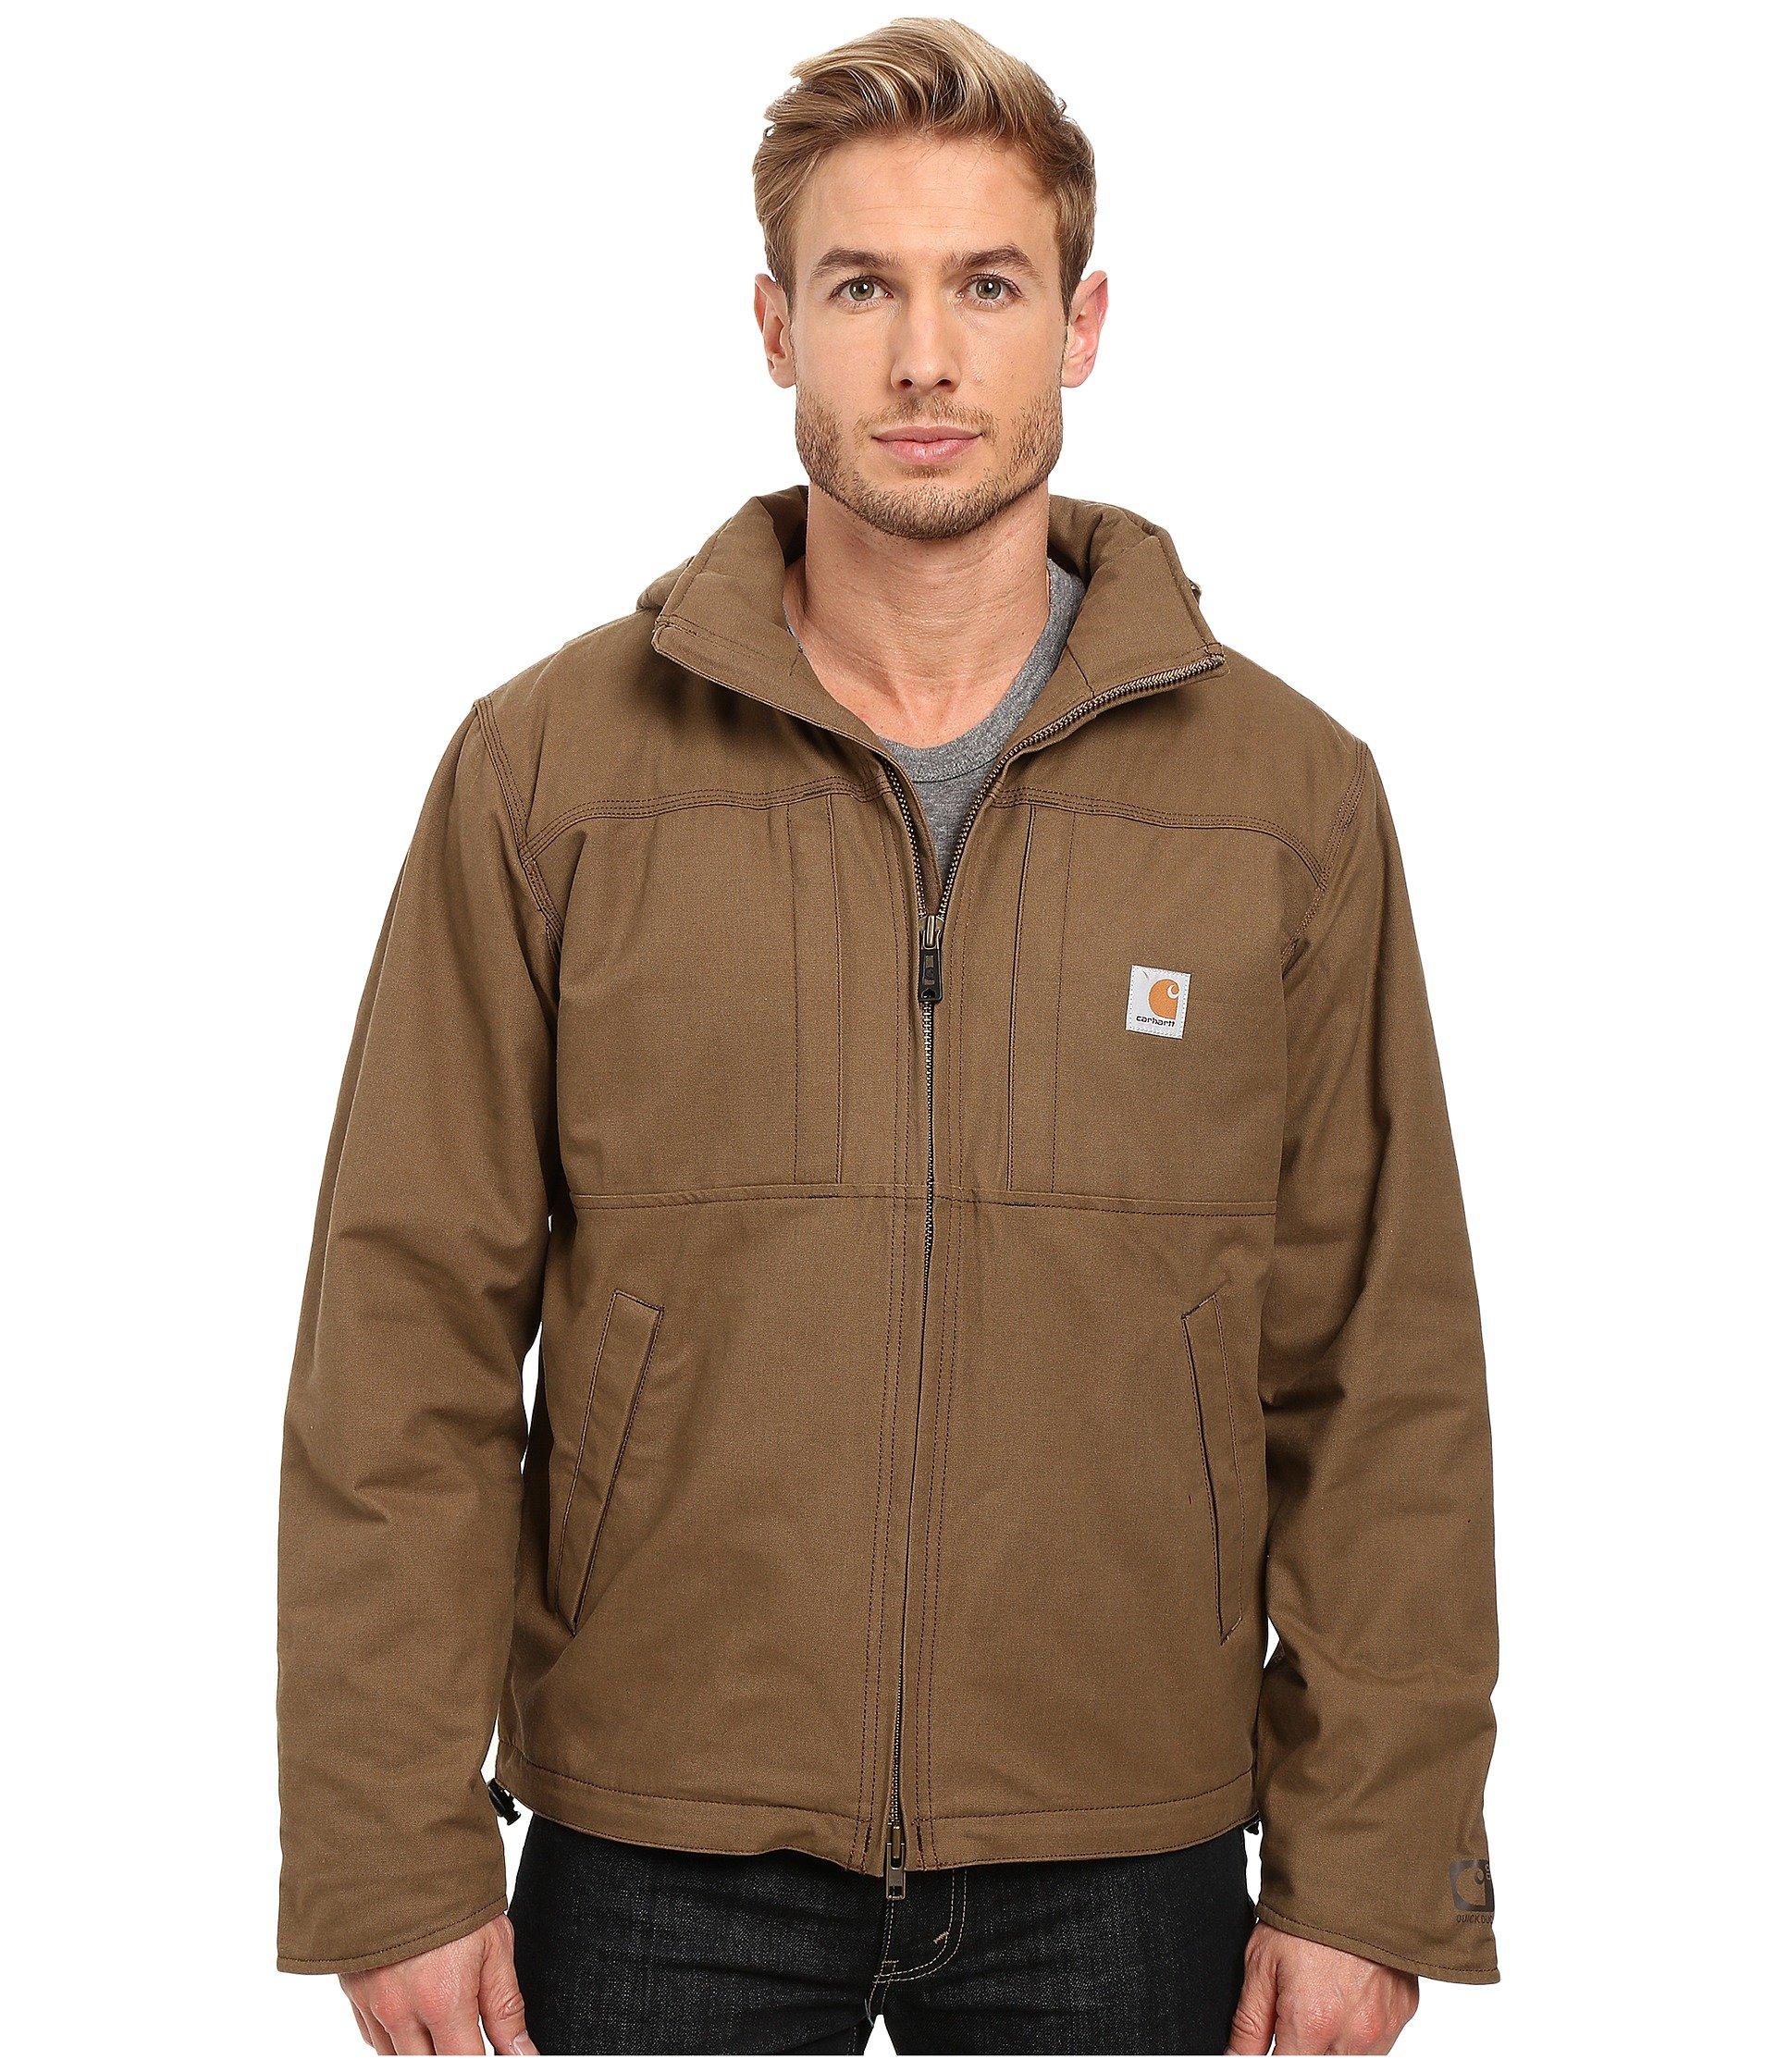 Carhartt Canvas Full Swing Cryder Jacket in Brown for Men - Save 6% - Lyst